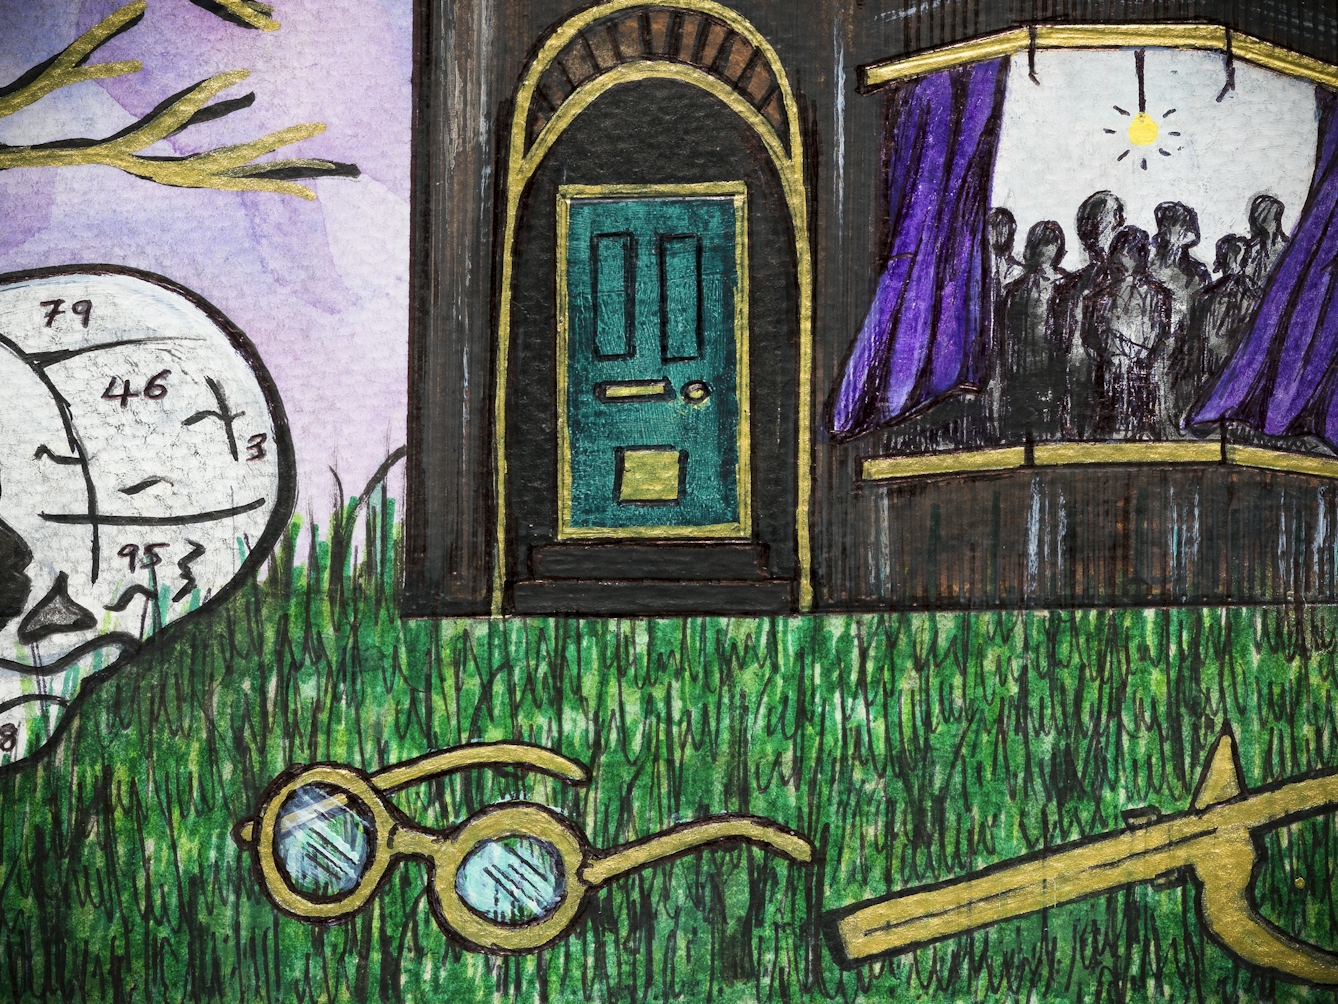 Detail from a larger colourful artwork made with paint and ink on textured watercolour paper. The artwork shows a dark grey gothic style building in the centre with purple curtains. The curtains in the downstairs bay window are drawn back and billow in the wind. Standing in the room are a group of dark silhouetted figures, looking out. Surrounding the house is a landscape of green grass on which are a selection of objects all at different scales. Theres a pair of glasses, and a human skull divided into numbered sections.